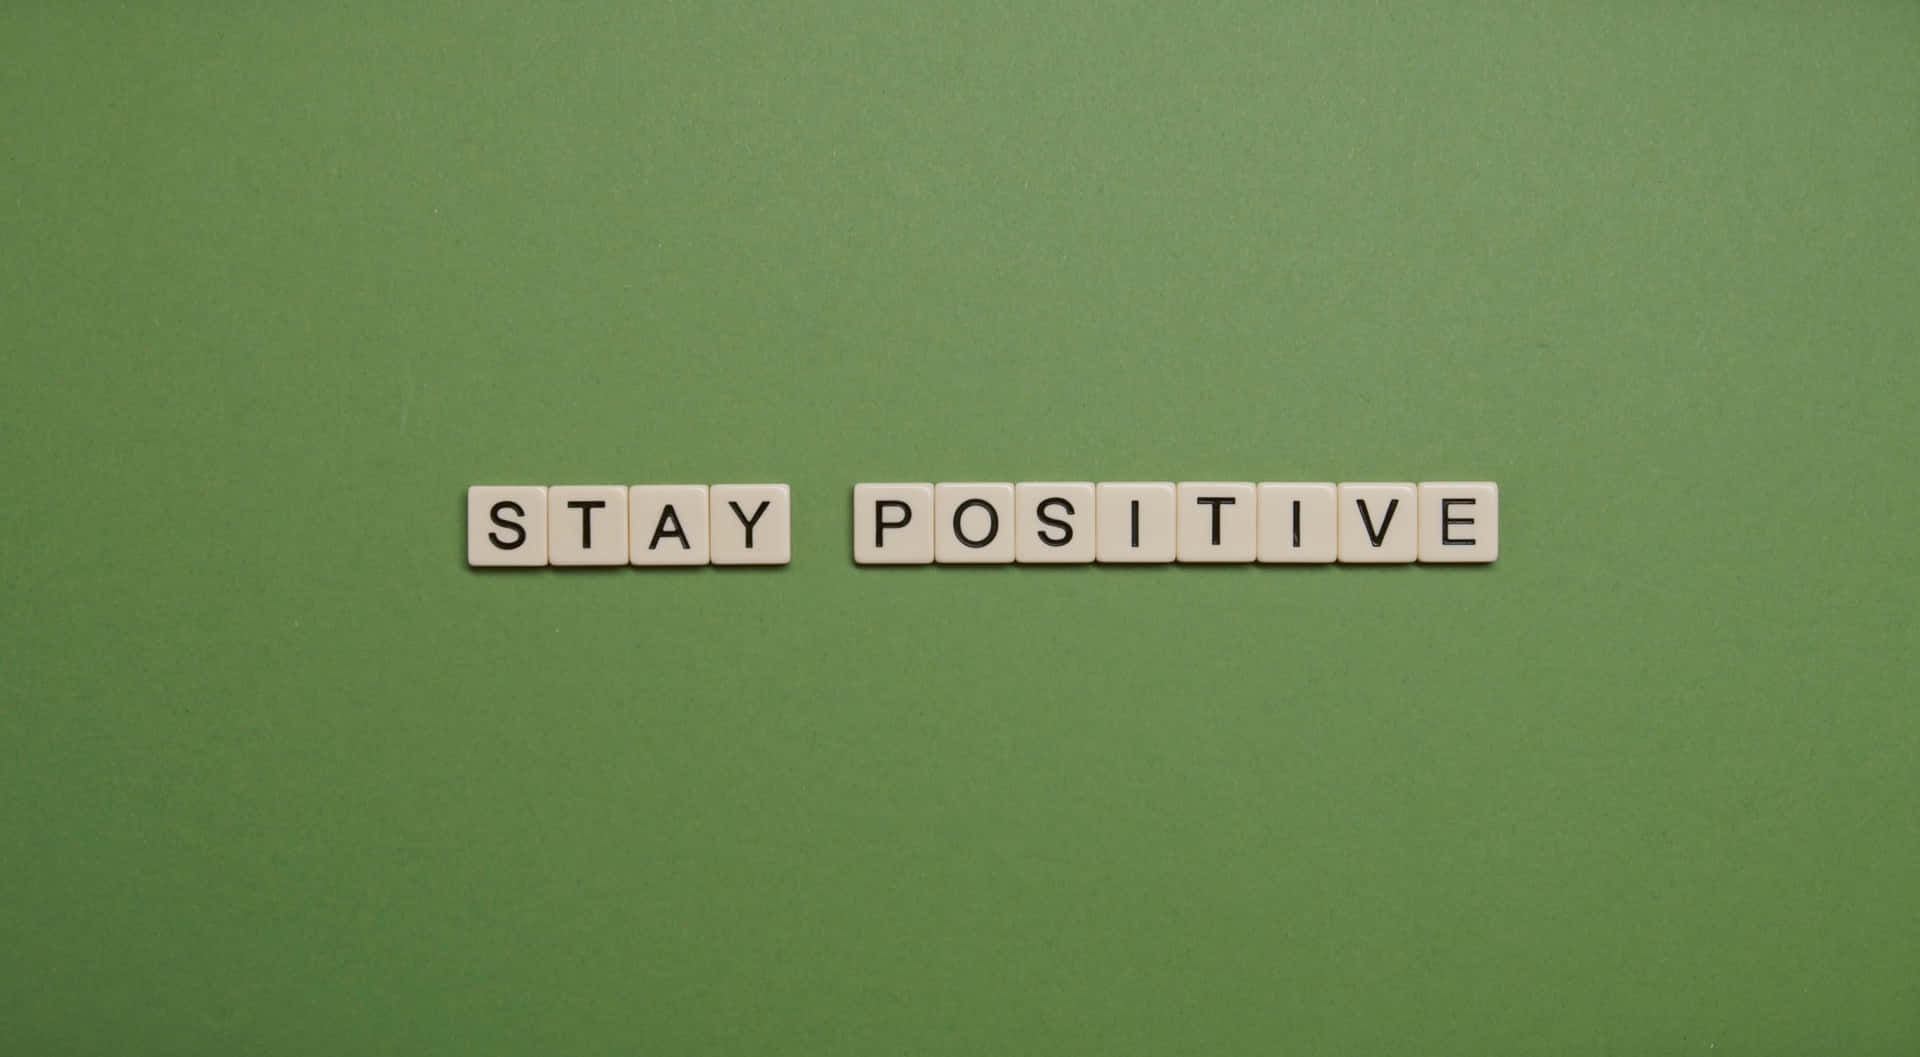 Stay Positive Images - Free Download on Freepik